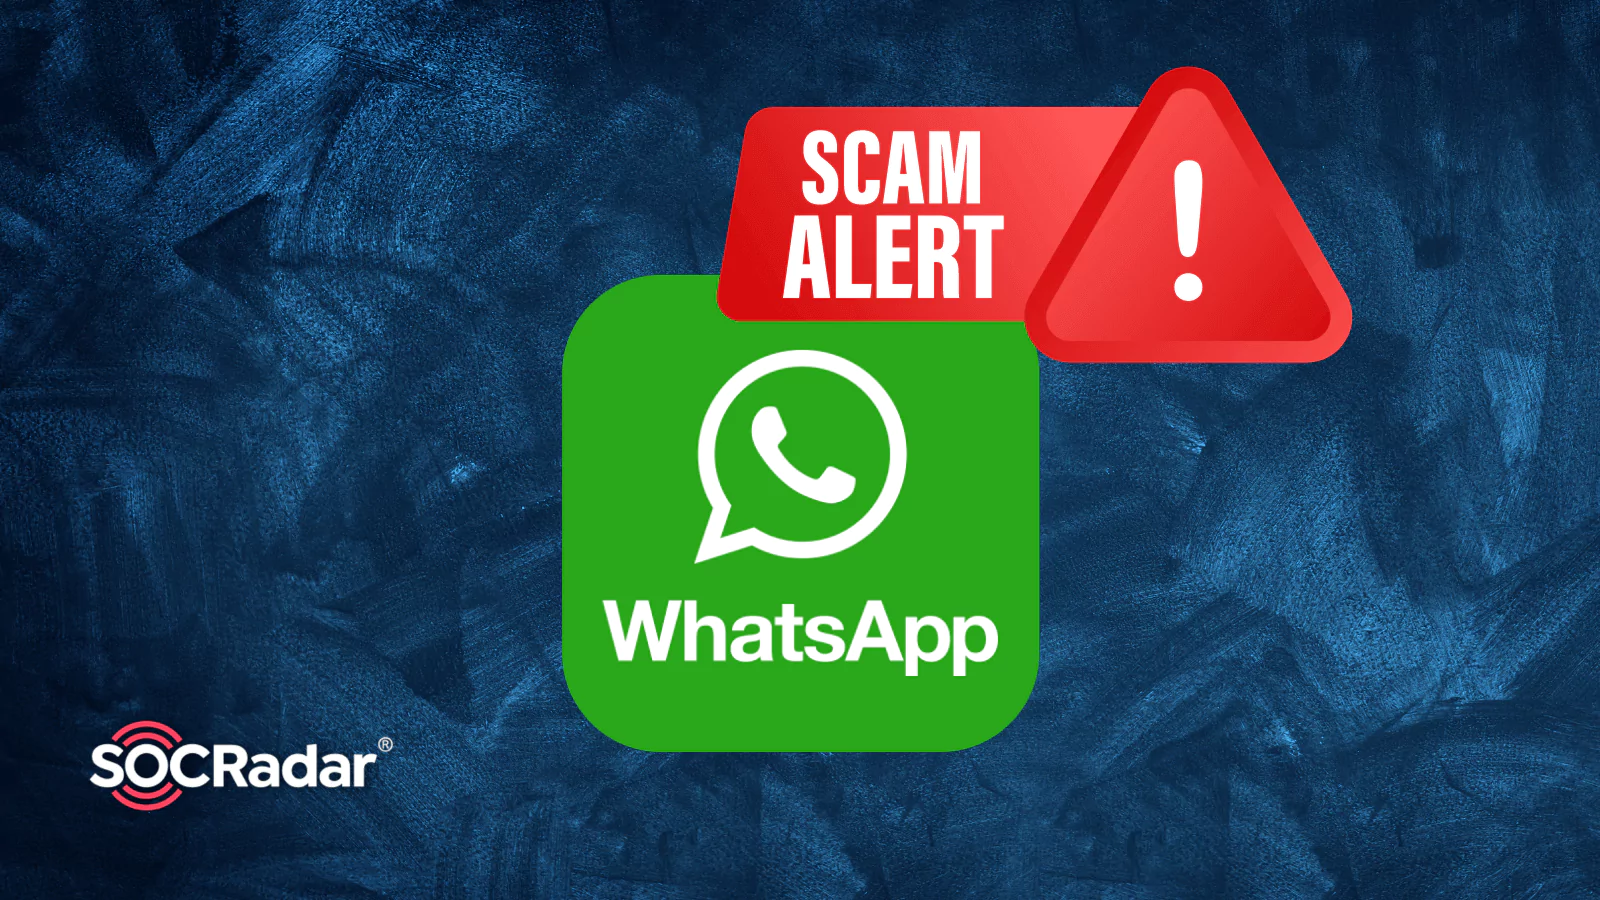 New Playground For Fraudsters How Do I Get Whatsapp Scam Iocs Socradar® Cyber Intelligence Inc